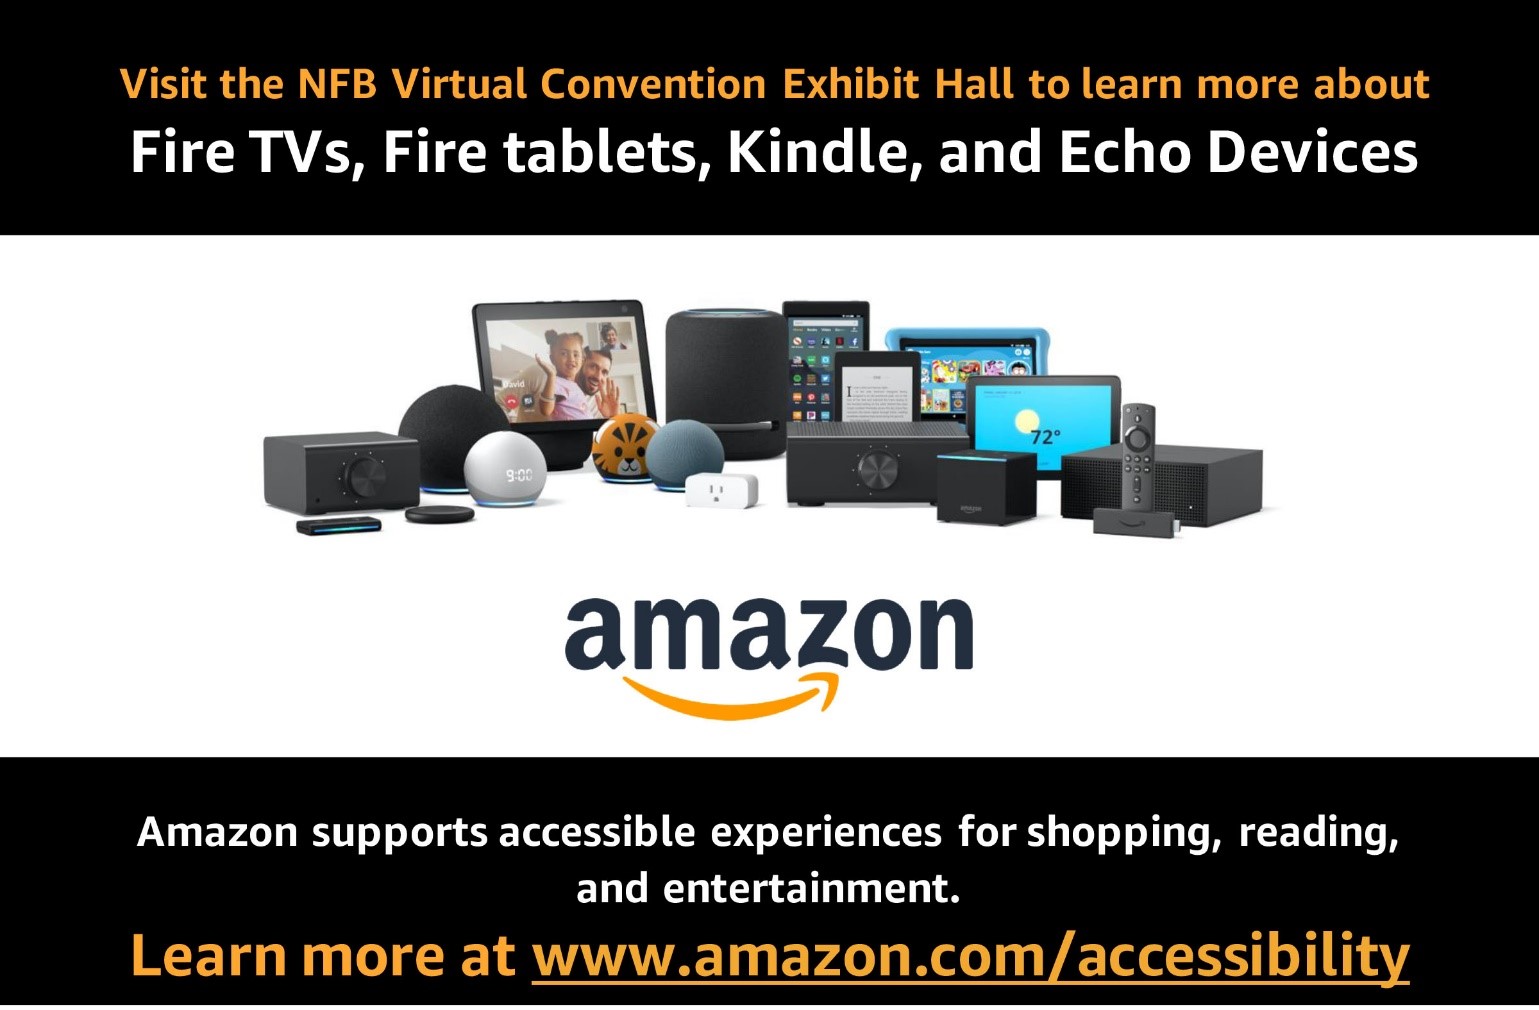 Amazon Visit the NFB virtual convention exhibit hall to learn more about Fire TVs, Fire tablets, Kindle, and Echo Devices. Amazon supports accessible experiences for shopping, reading, and entertainment. Learn more at www.amazon.com/accessibility.